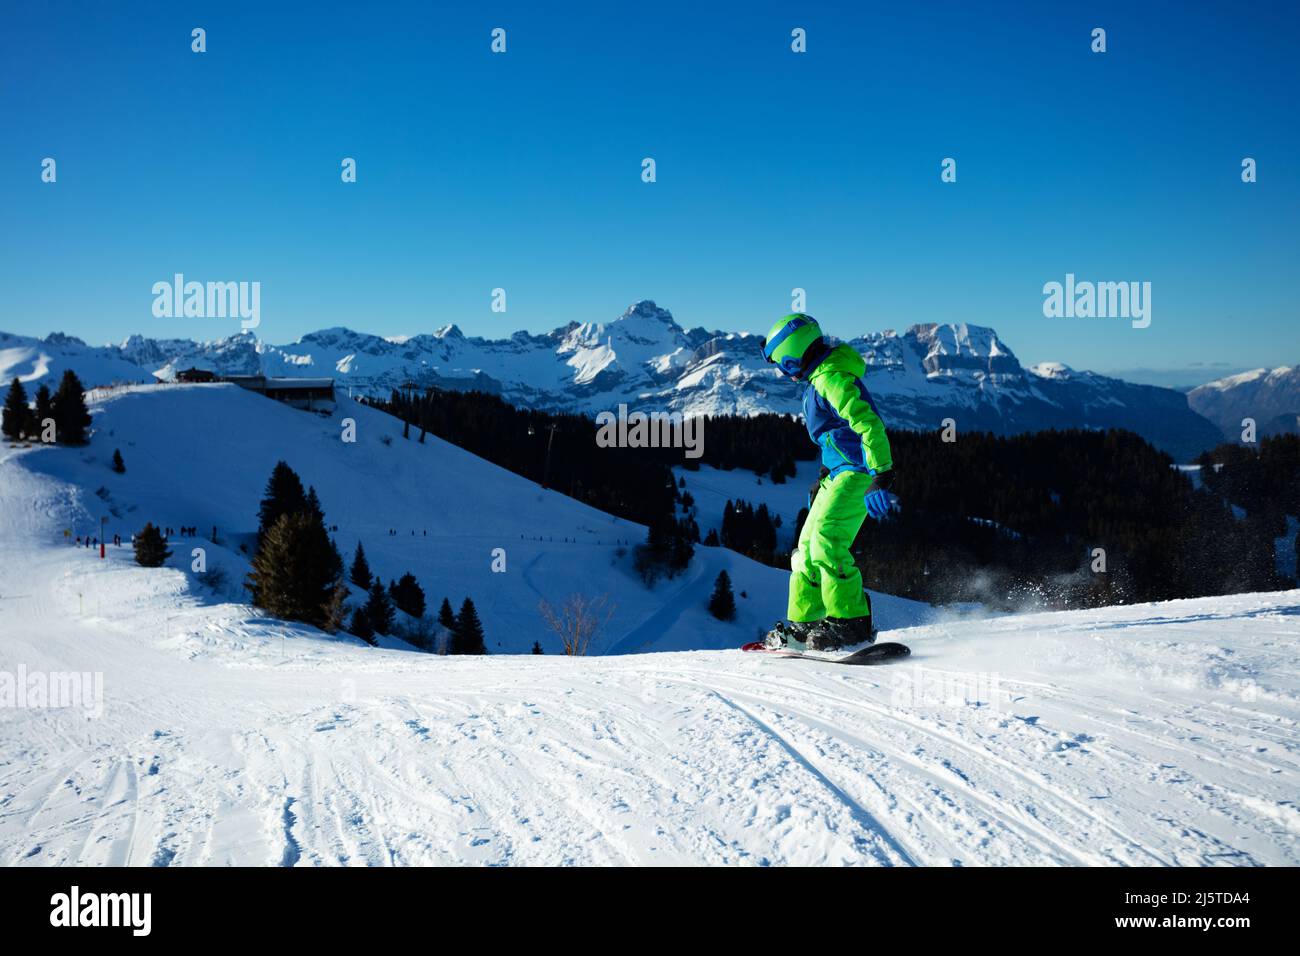 Boy going down ski slope on snowboard from the mountain Stock Photo